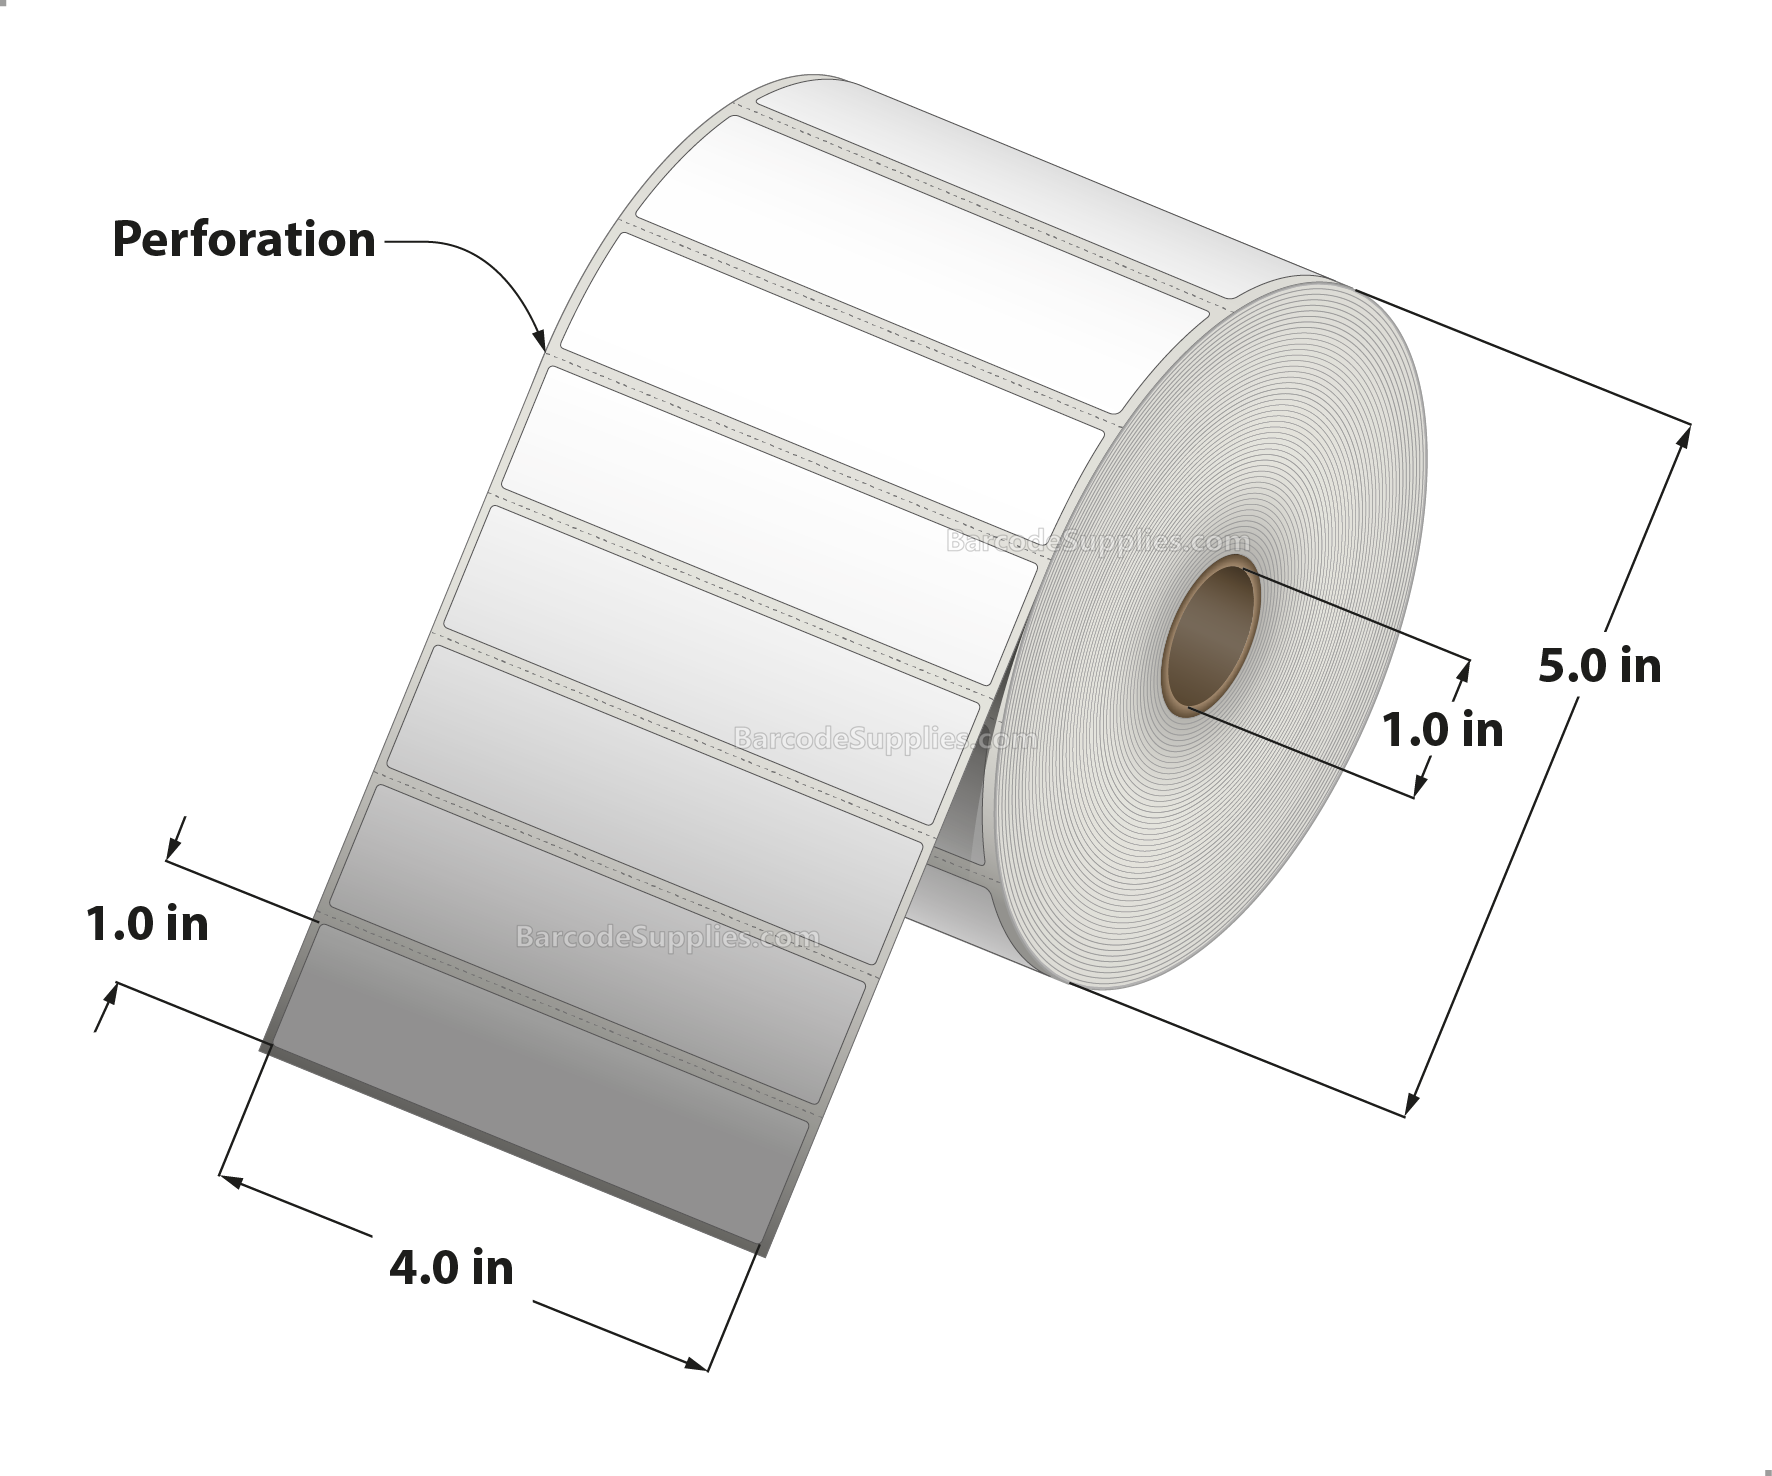 4 x 1 Thermal Transfer White Labels With Permanent Acrylic Adhesive - Perforated - 2300 Labels Per Roll - Carton Of 4 Rolls - 9200 Labels Total - MPN: TH41-15PTT